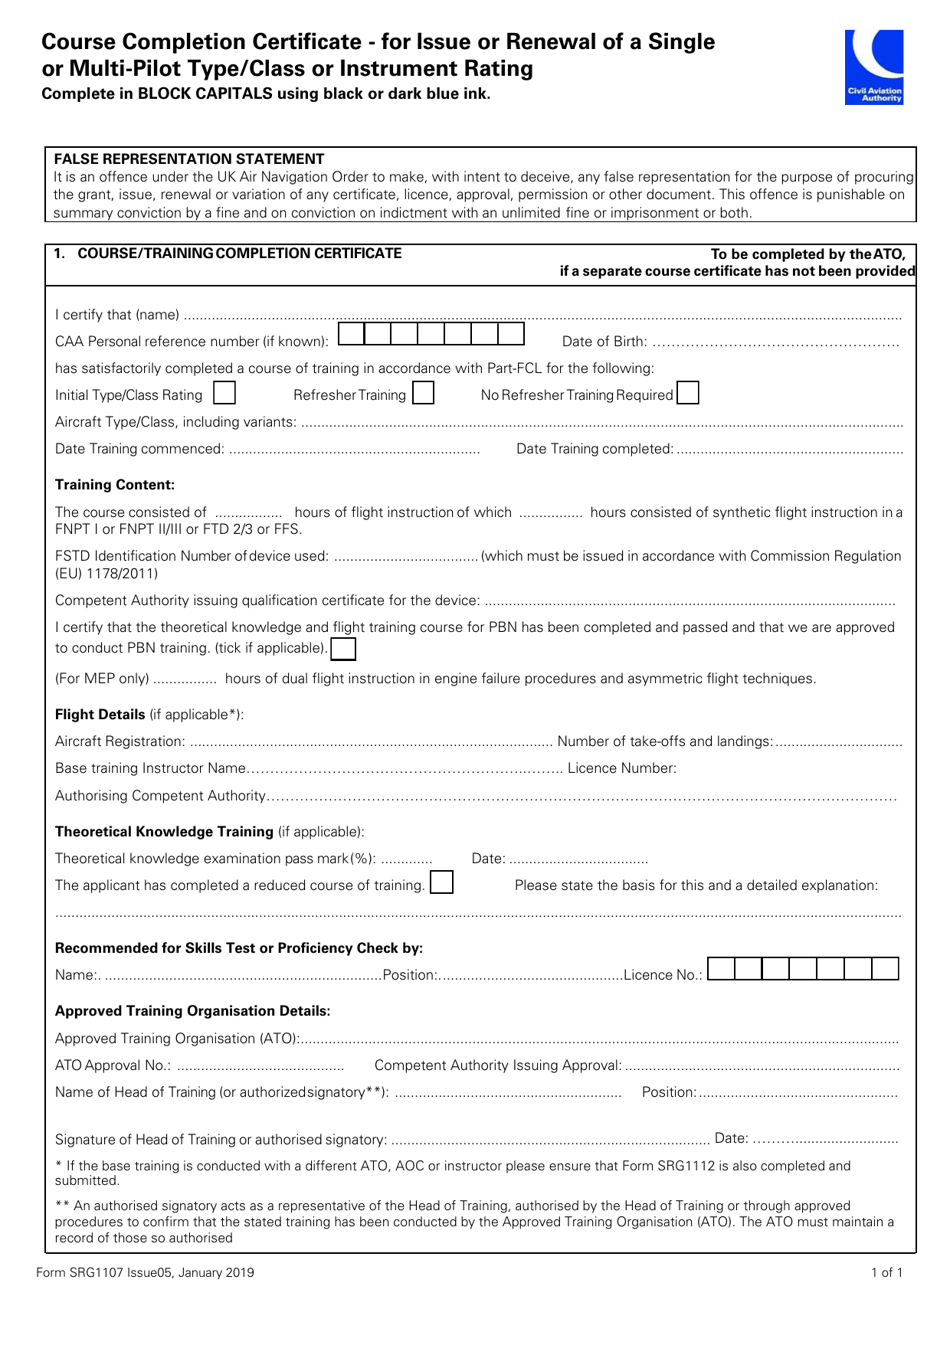 Form SRG1107 Course Completion Certificate - for Issue or Renewal of a Single or Multi-Pilot Type / Class or Instrument Rating - United Kingdom, Page 1